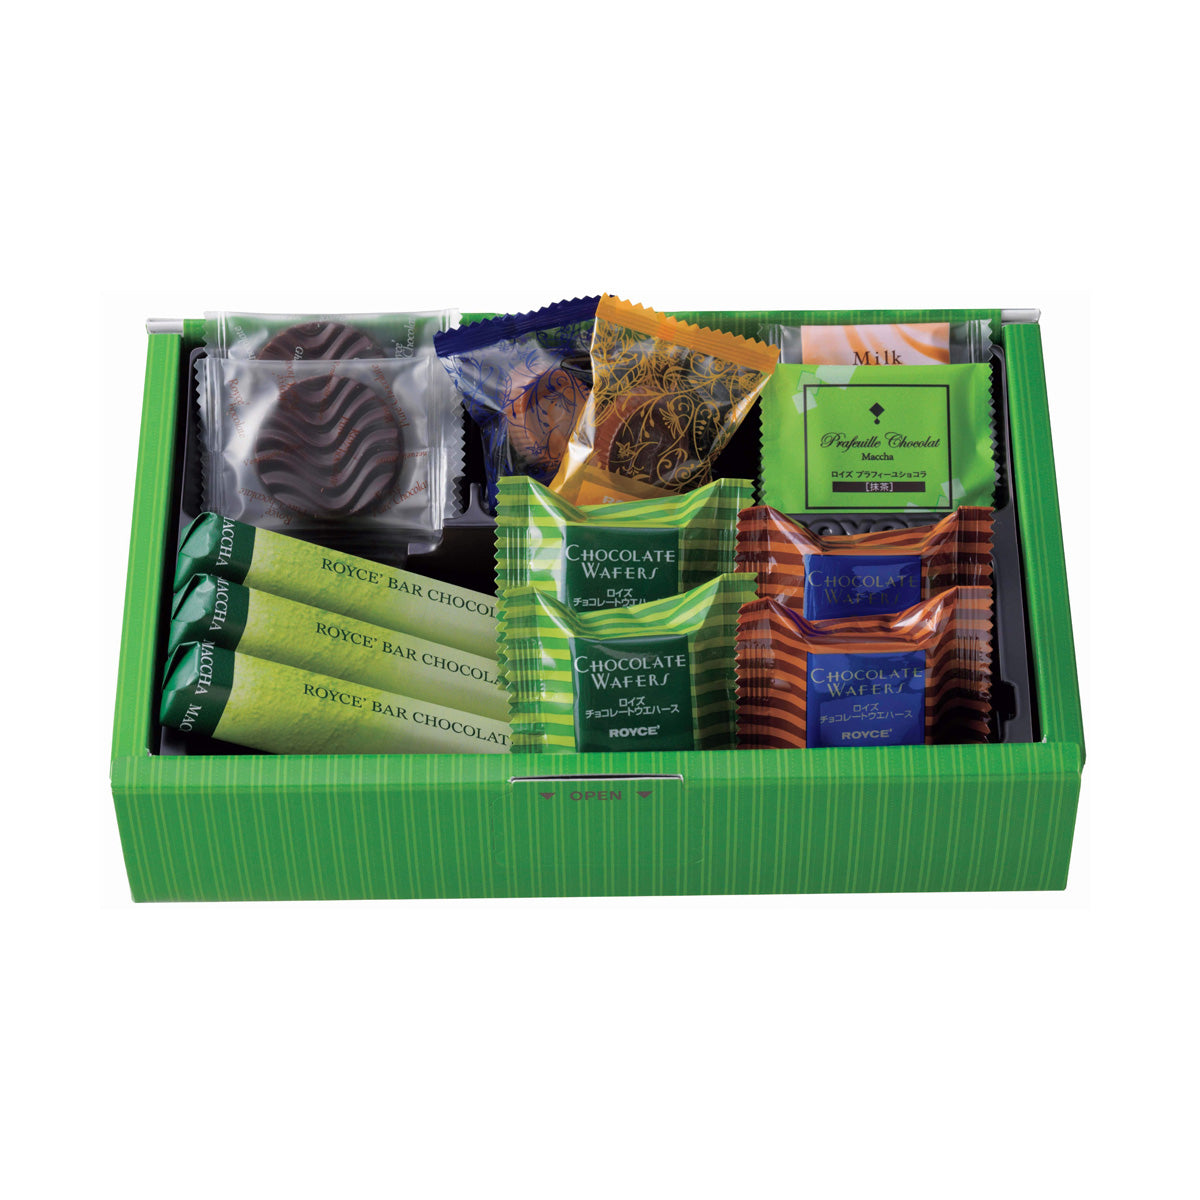 ROYCE' Chocolate - ROYCE' Variety Pack "Flavorful" - Image shows an open box with various chocolates in different shapes, sizes, and colors. Visible texts from left are Matcha ROYCE' Bar Chocolate, Chocolate Wafers, ROYCE', Milk, Prafeuille Chocolat Matcha